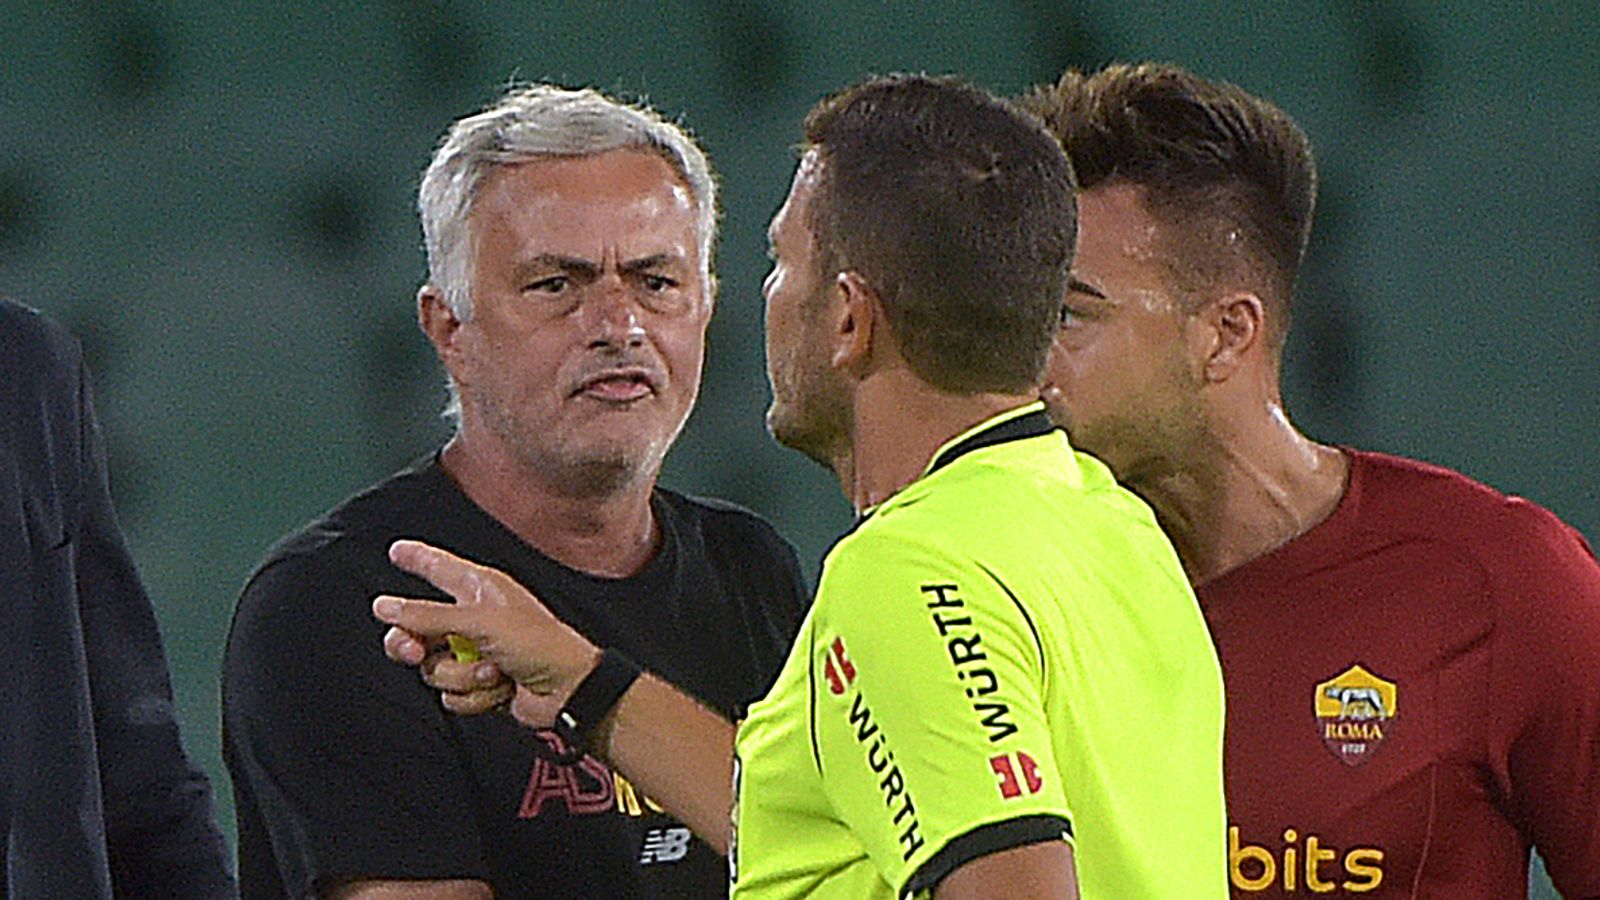 Jose Mourinho sent off as Roma finish with eight players in Real Betis defeat